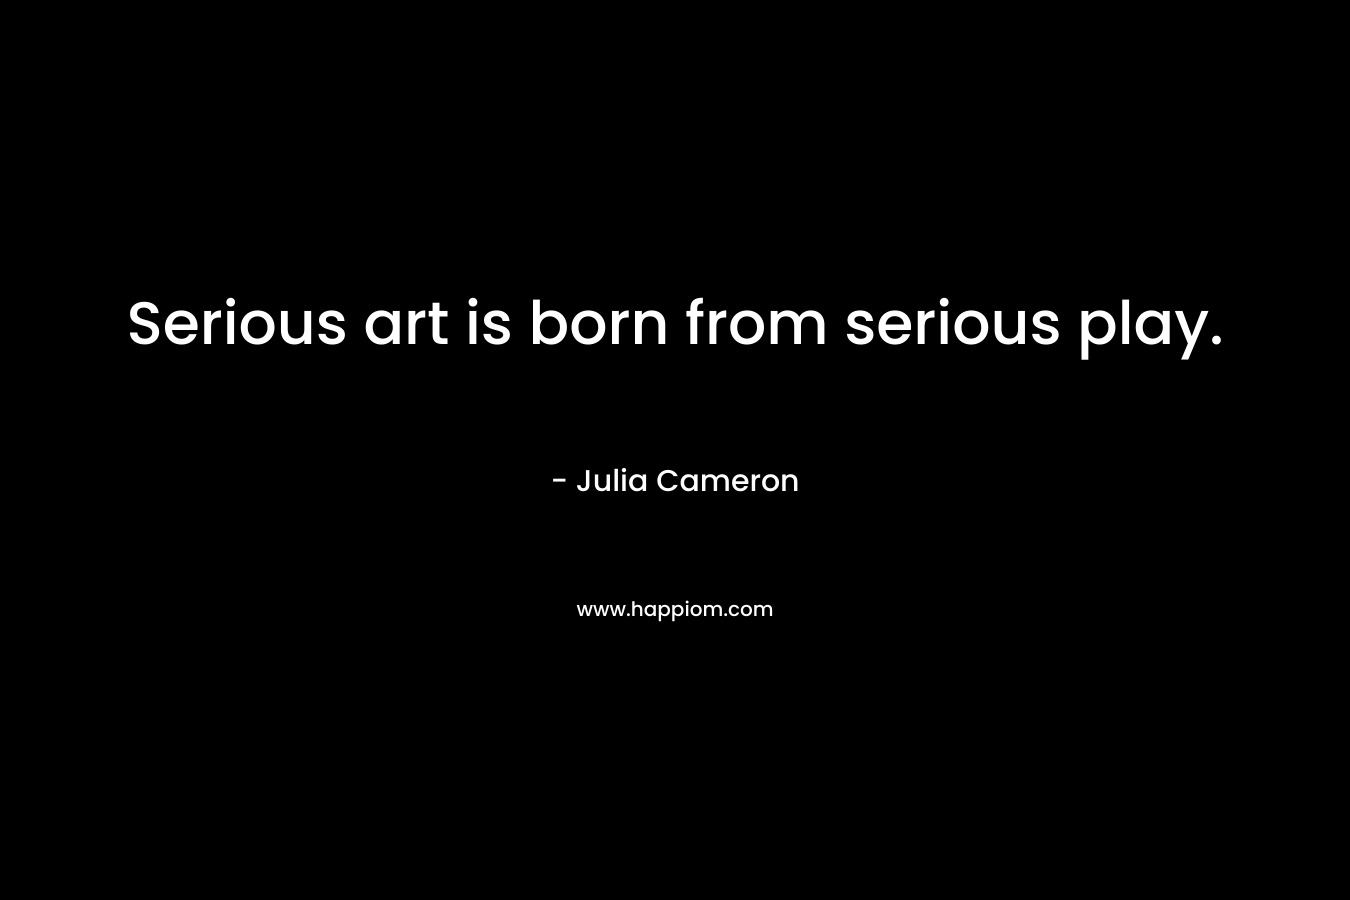 Serious art is born from serious play.